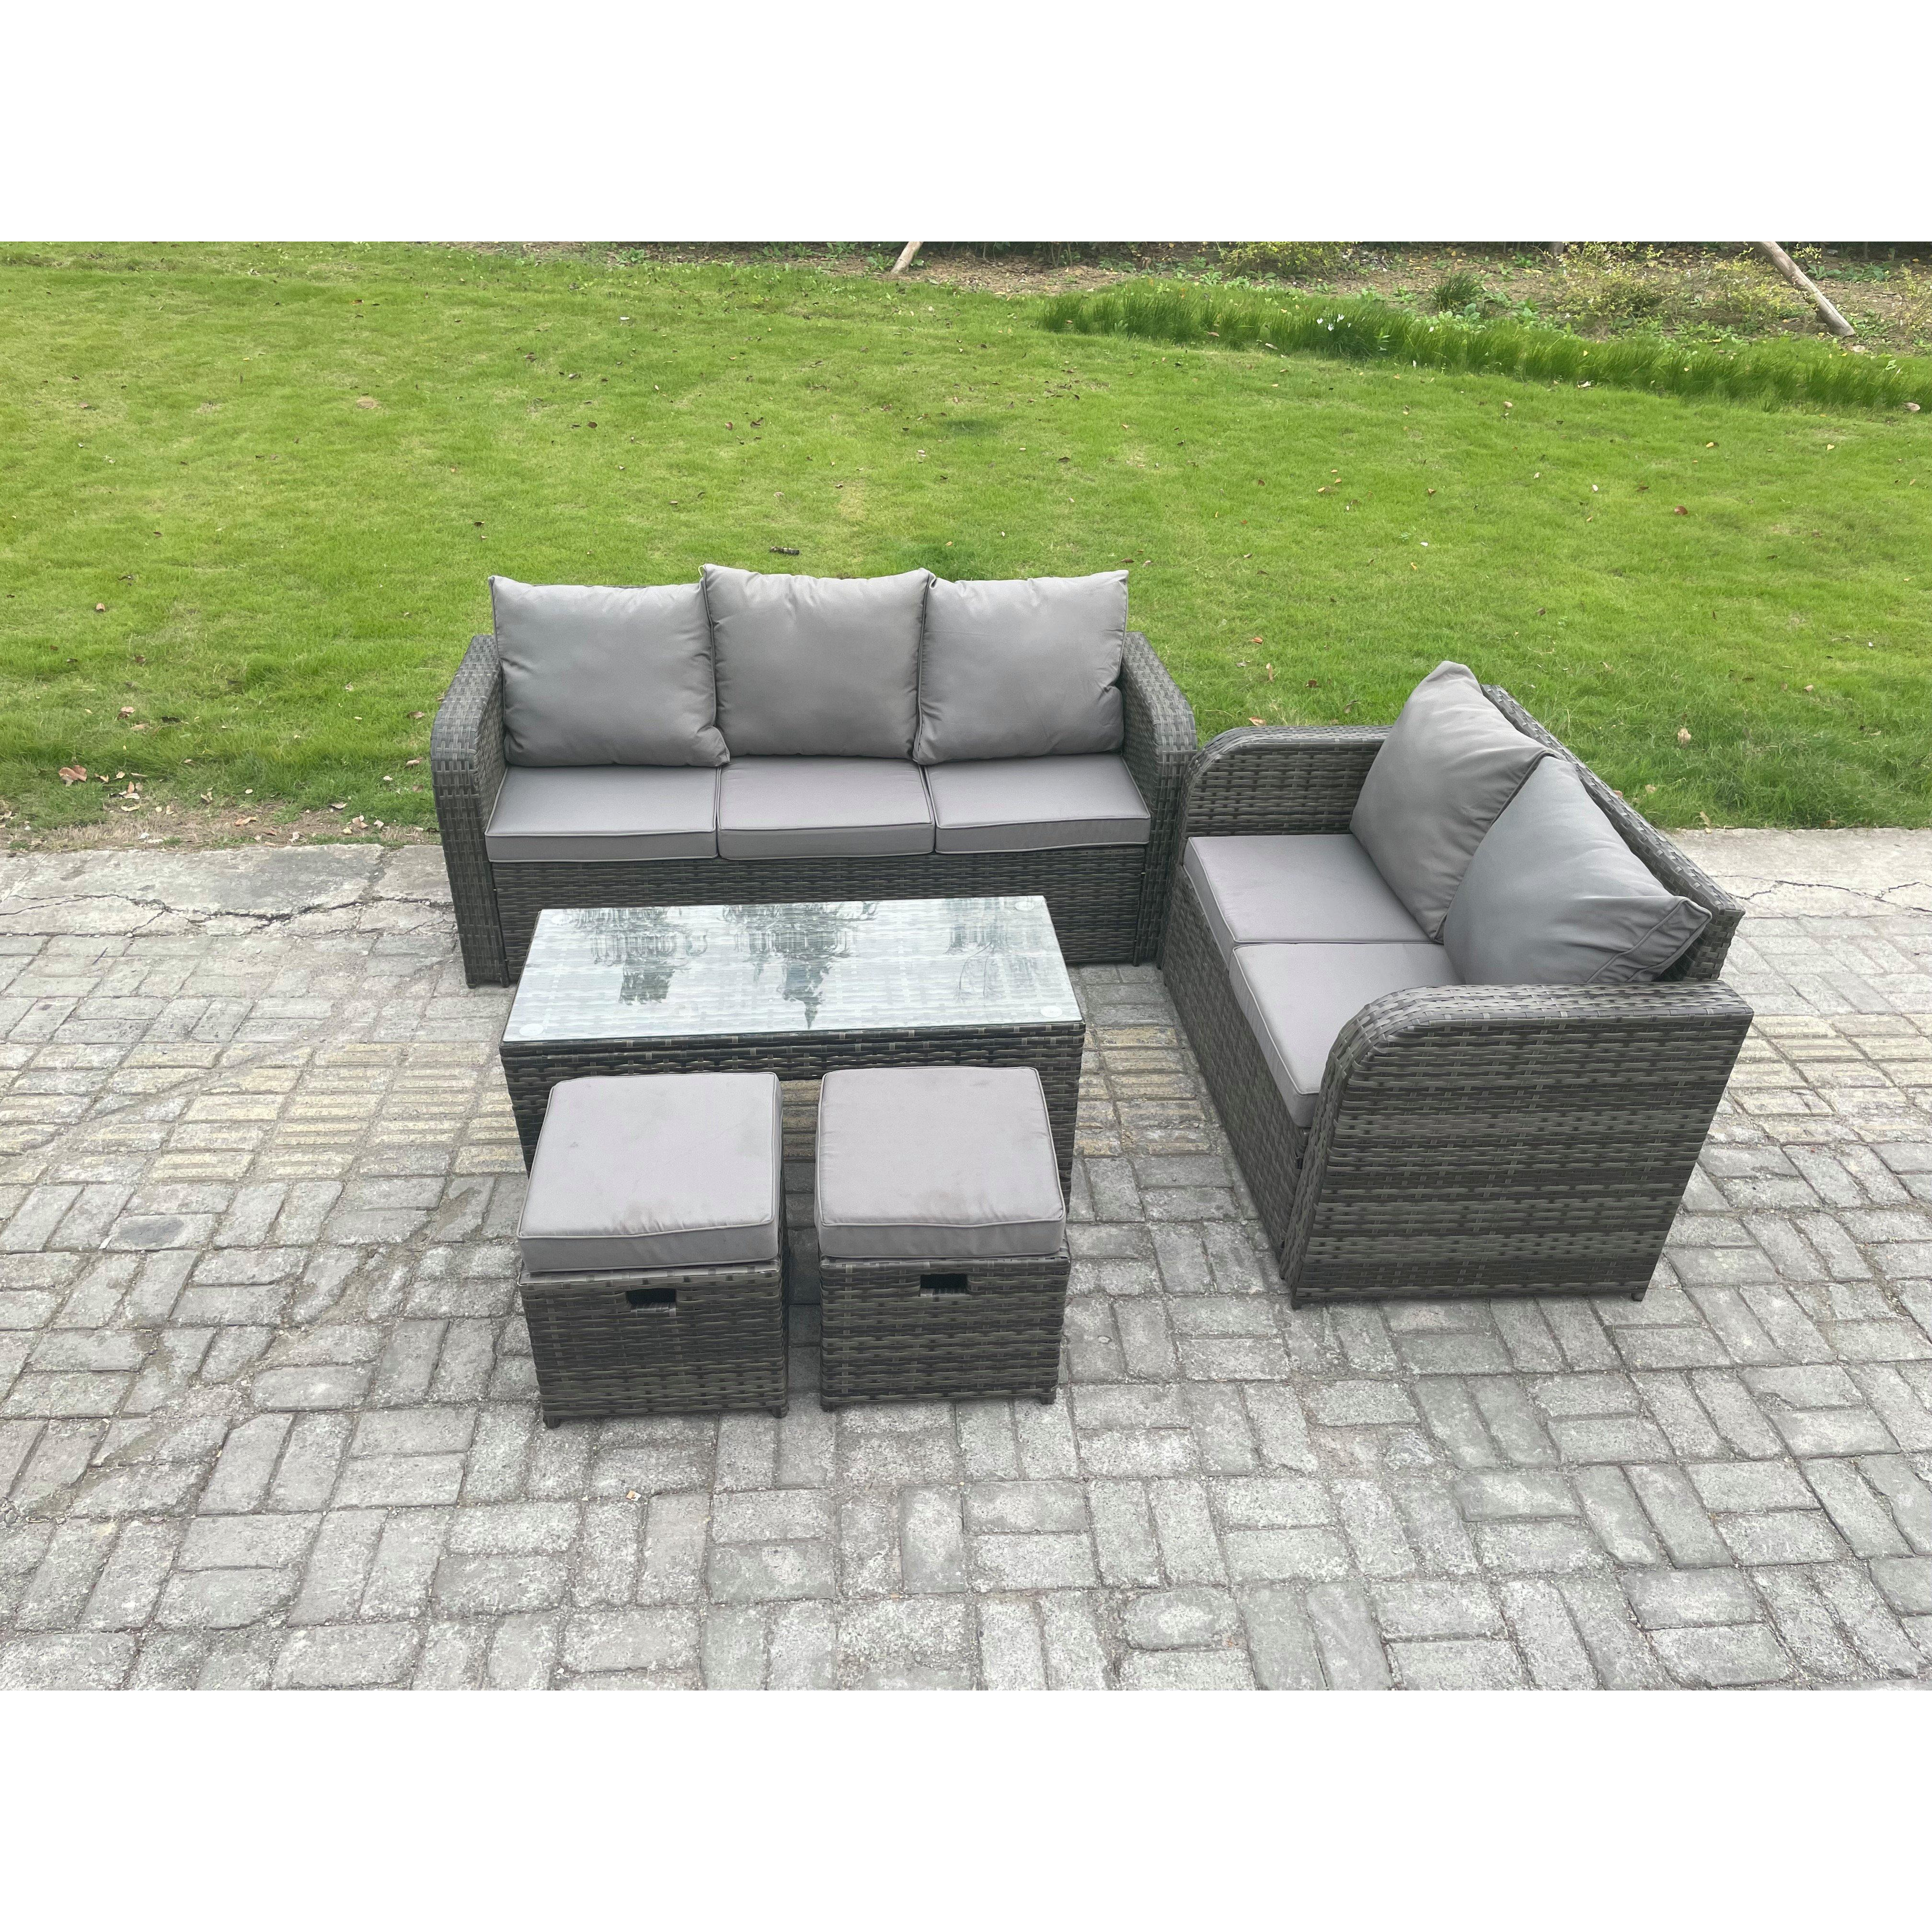 7 Seater Outdoor Rattan Garden Furniture Set with Patio Lounge Sofa Set with Rectangular Coffee Table - image 1